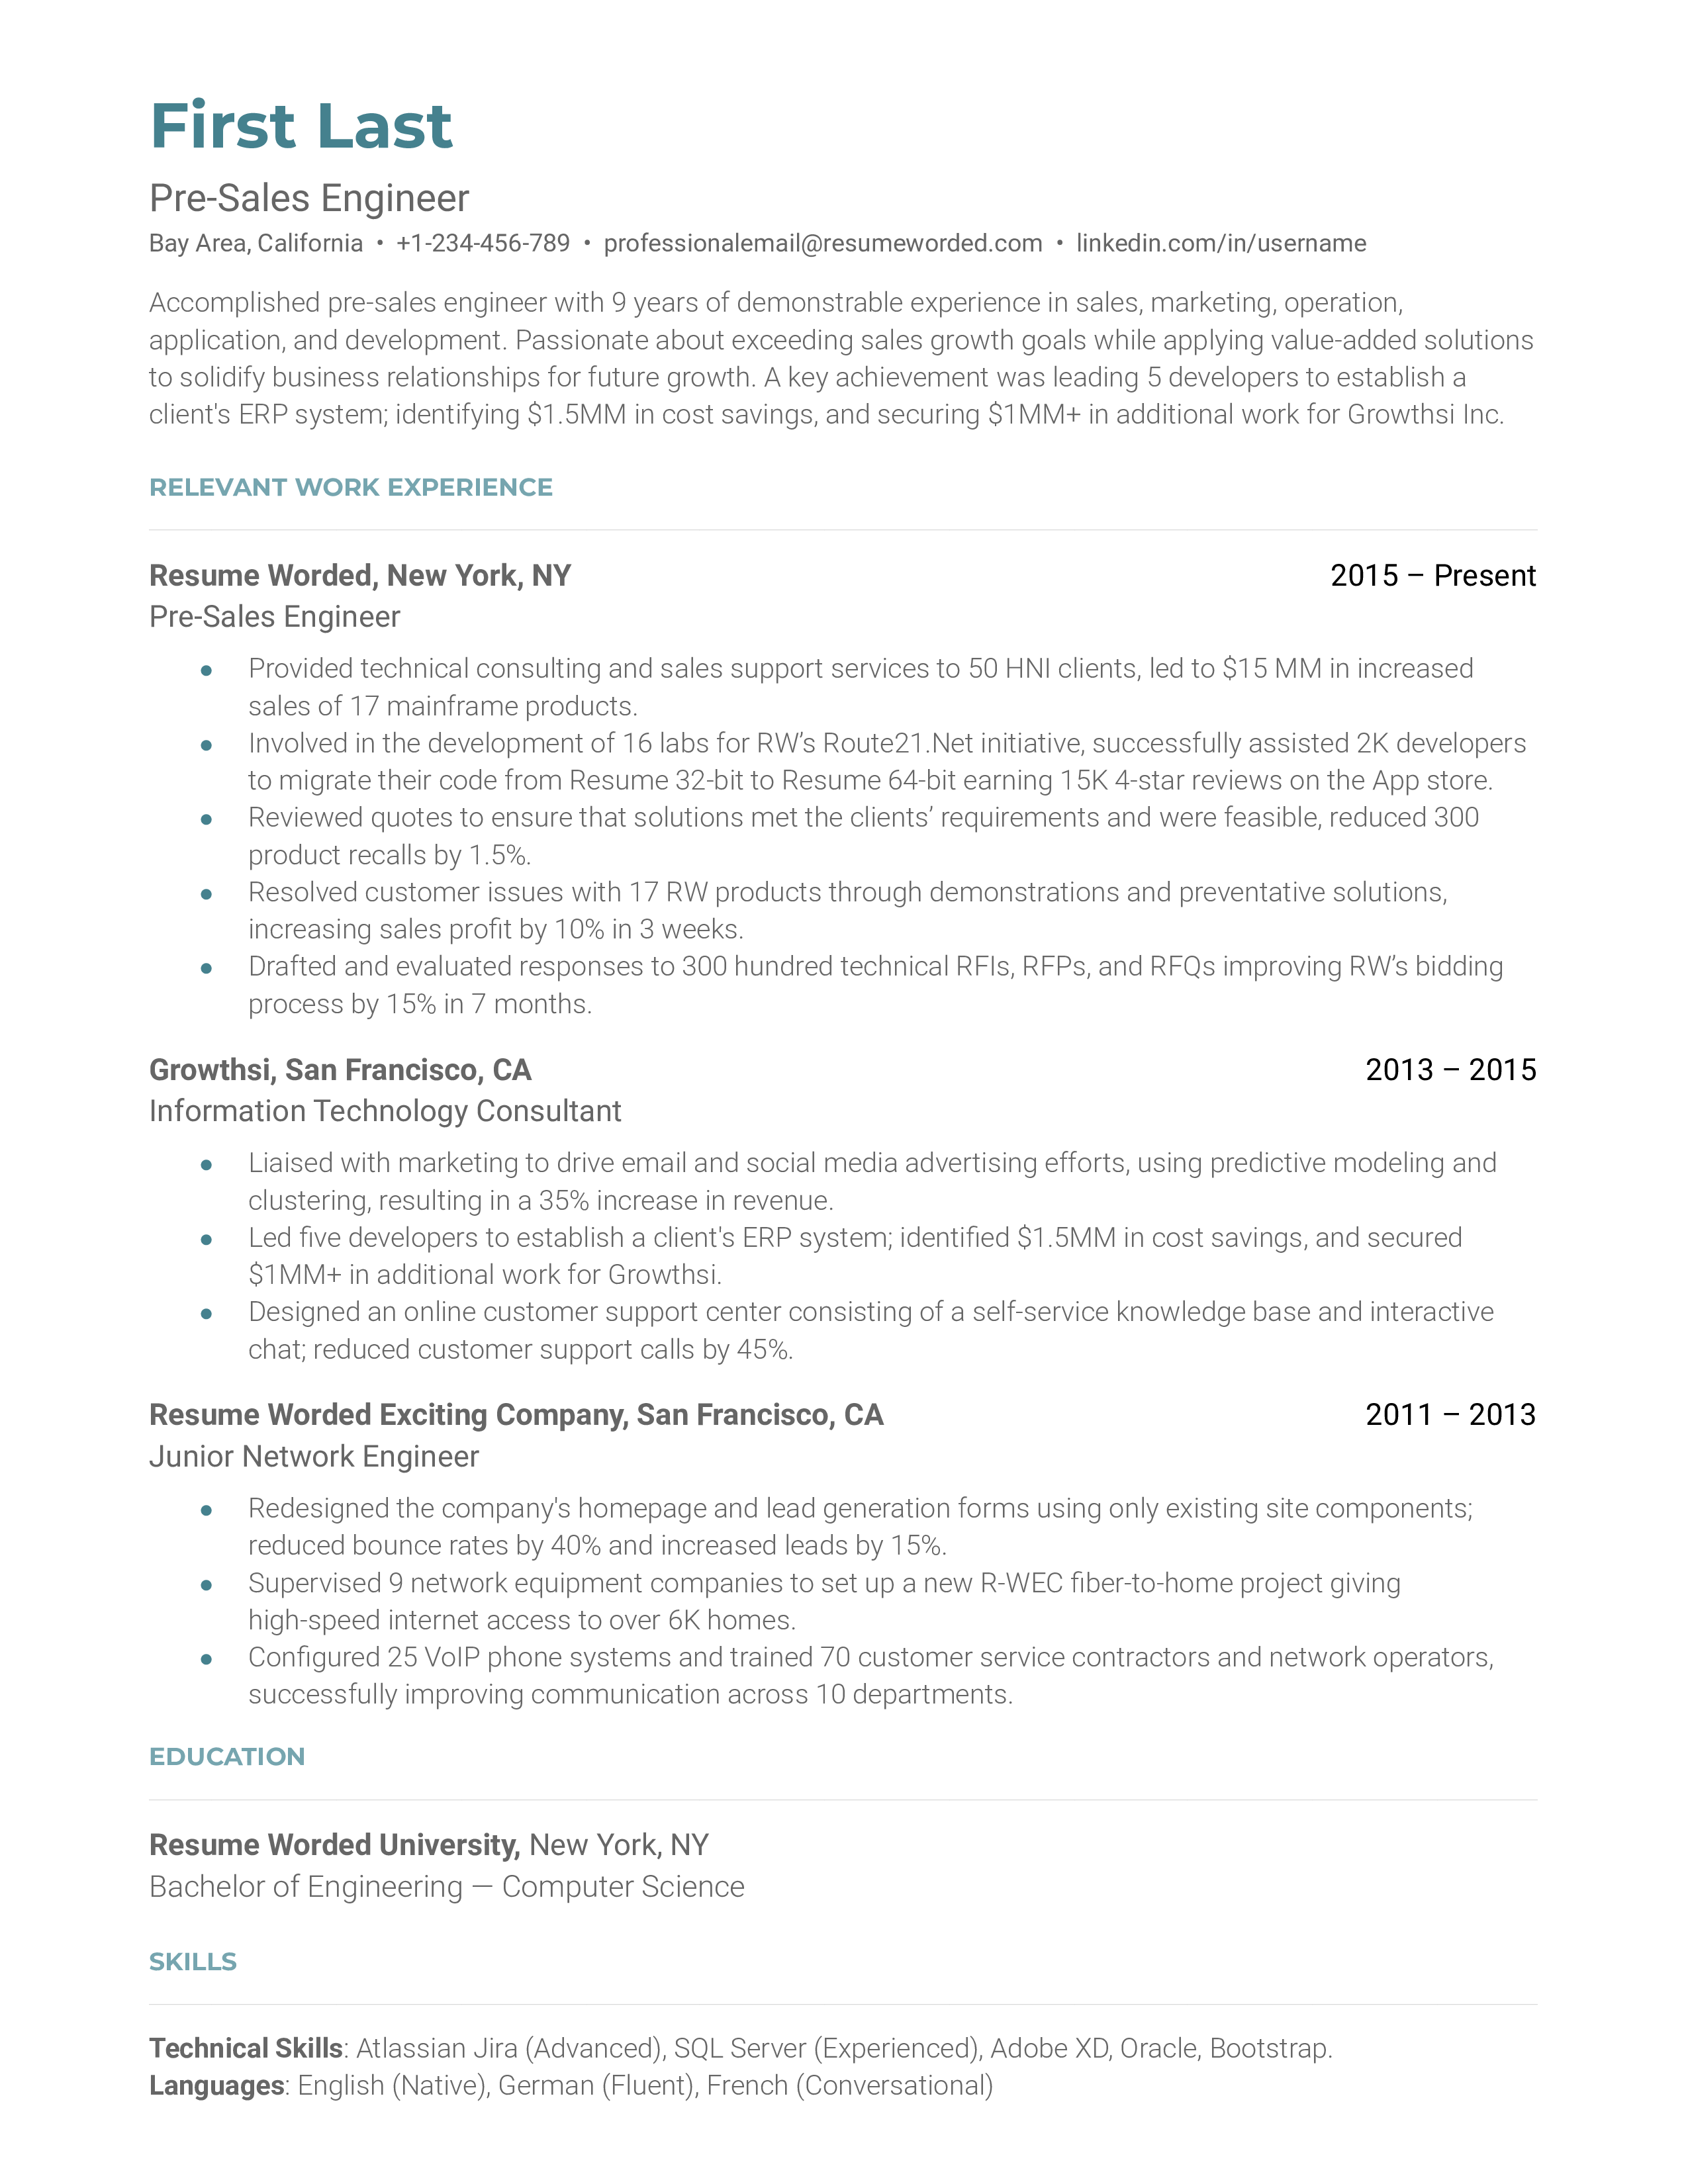 A screenshot of a CV for a Pre-Sales Engineer role showcasing problem-solving experiences and continuous learning.